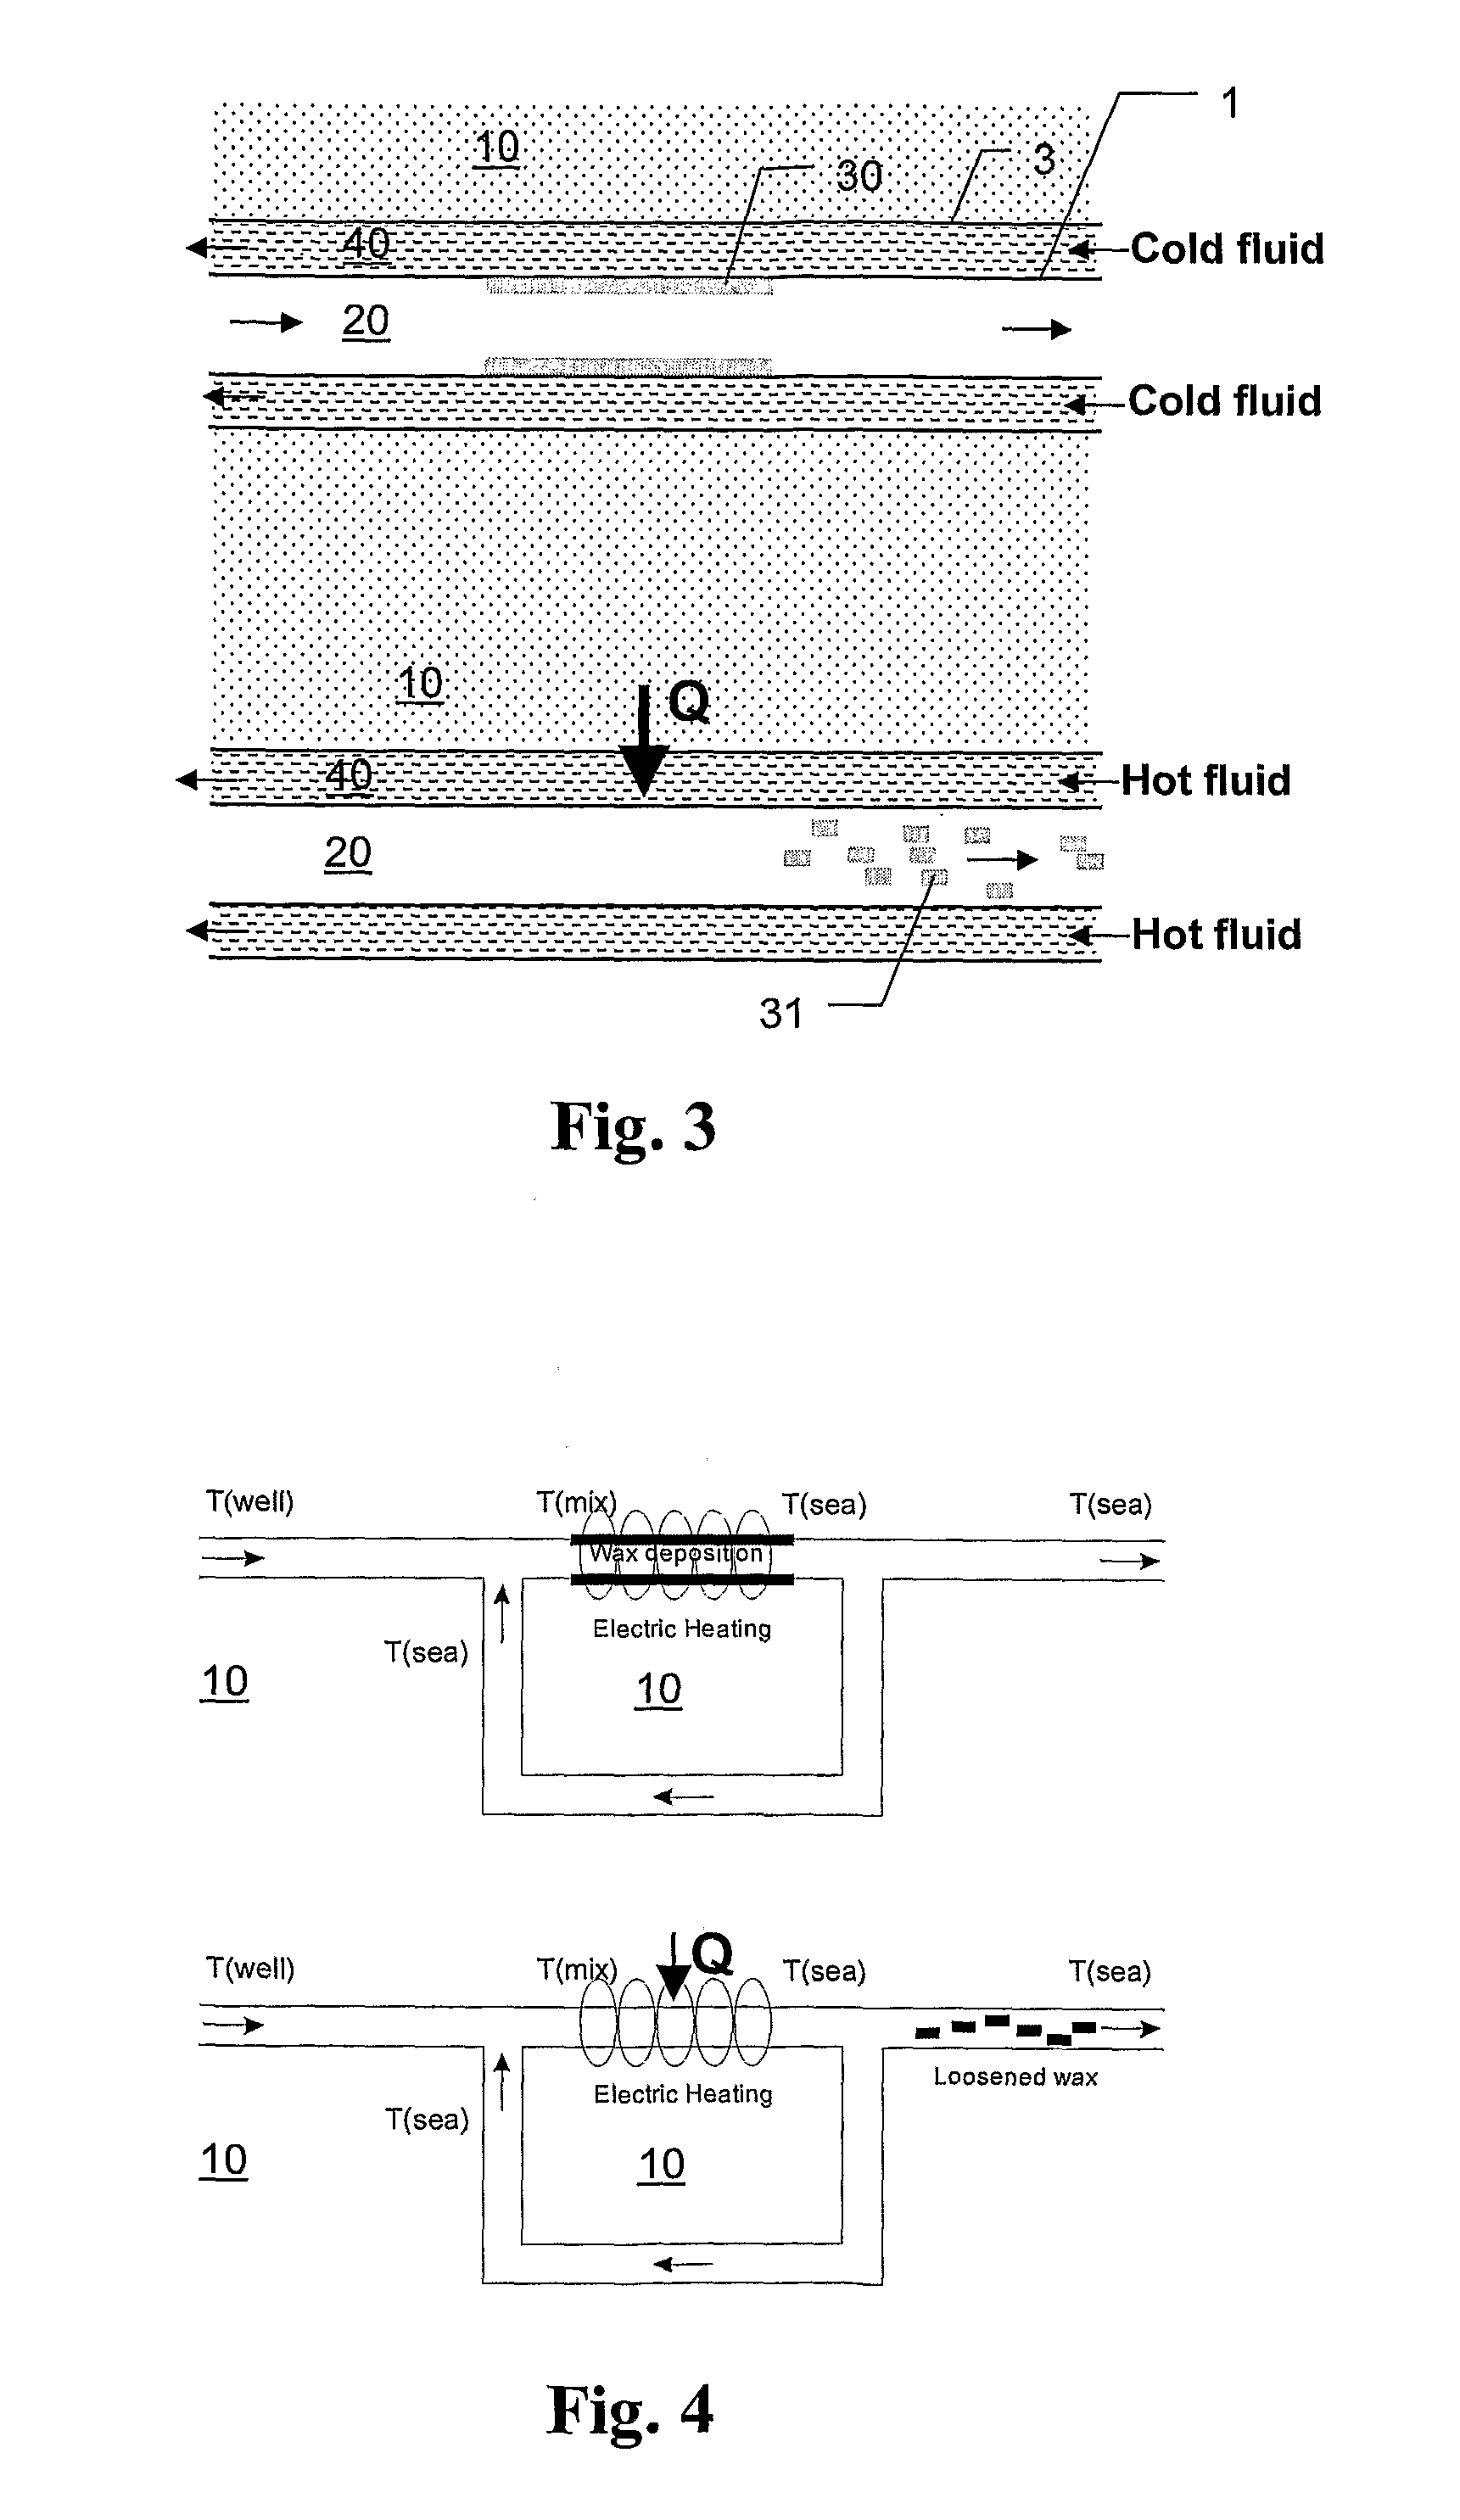 Method for wax removal and measurement of wax thickness